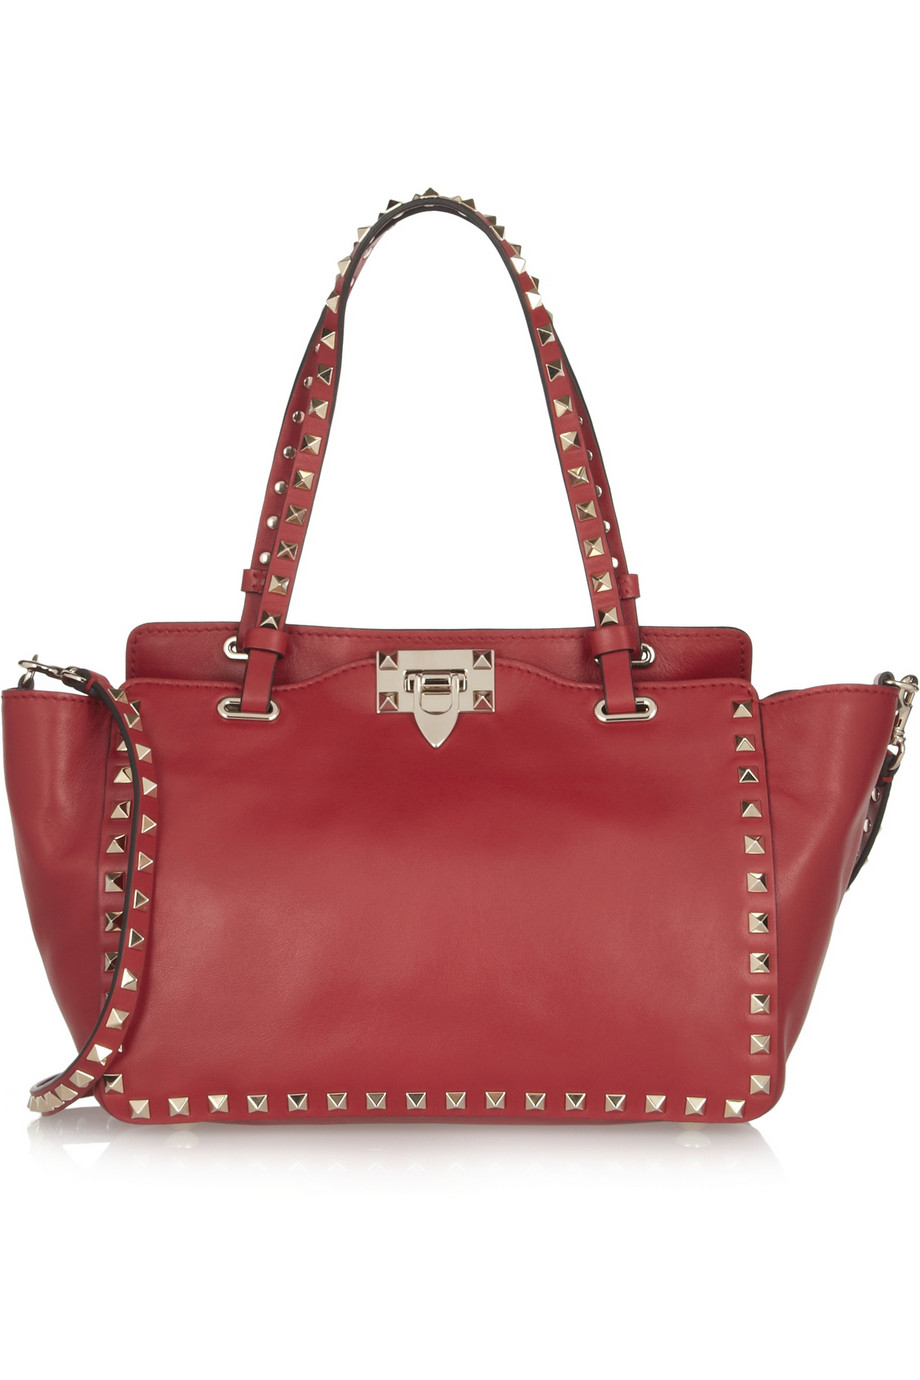 Valentino Rockstud Leather Bag in Red | Lyst